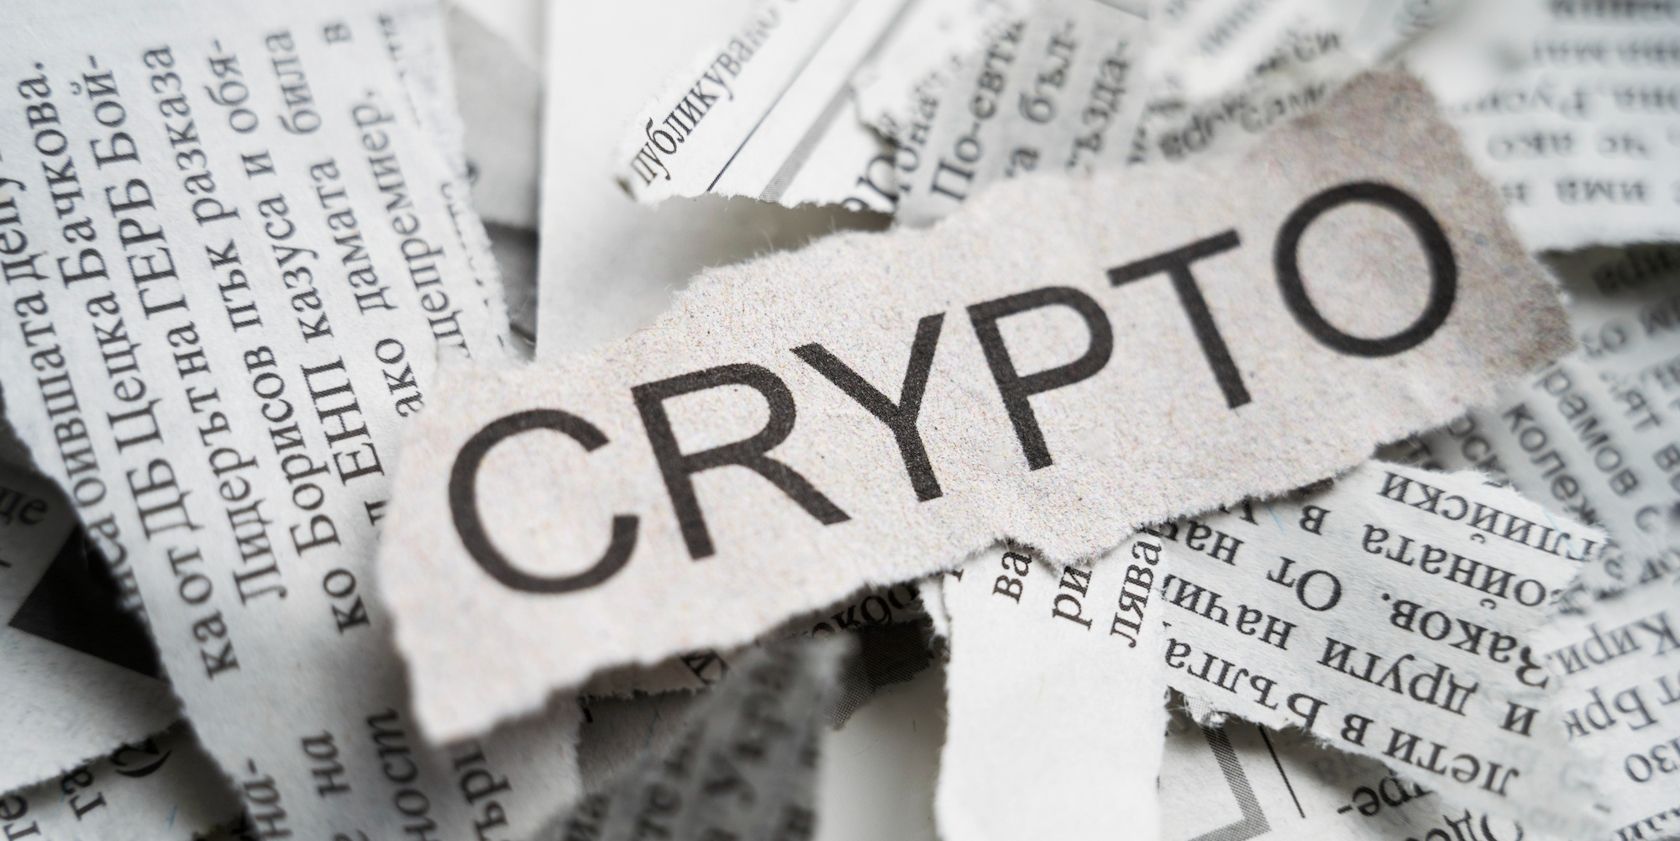 crypto written on a torn piece of newspaper